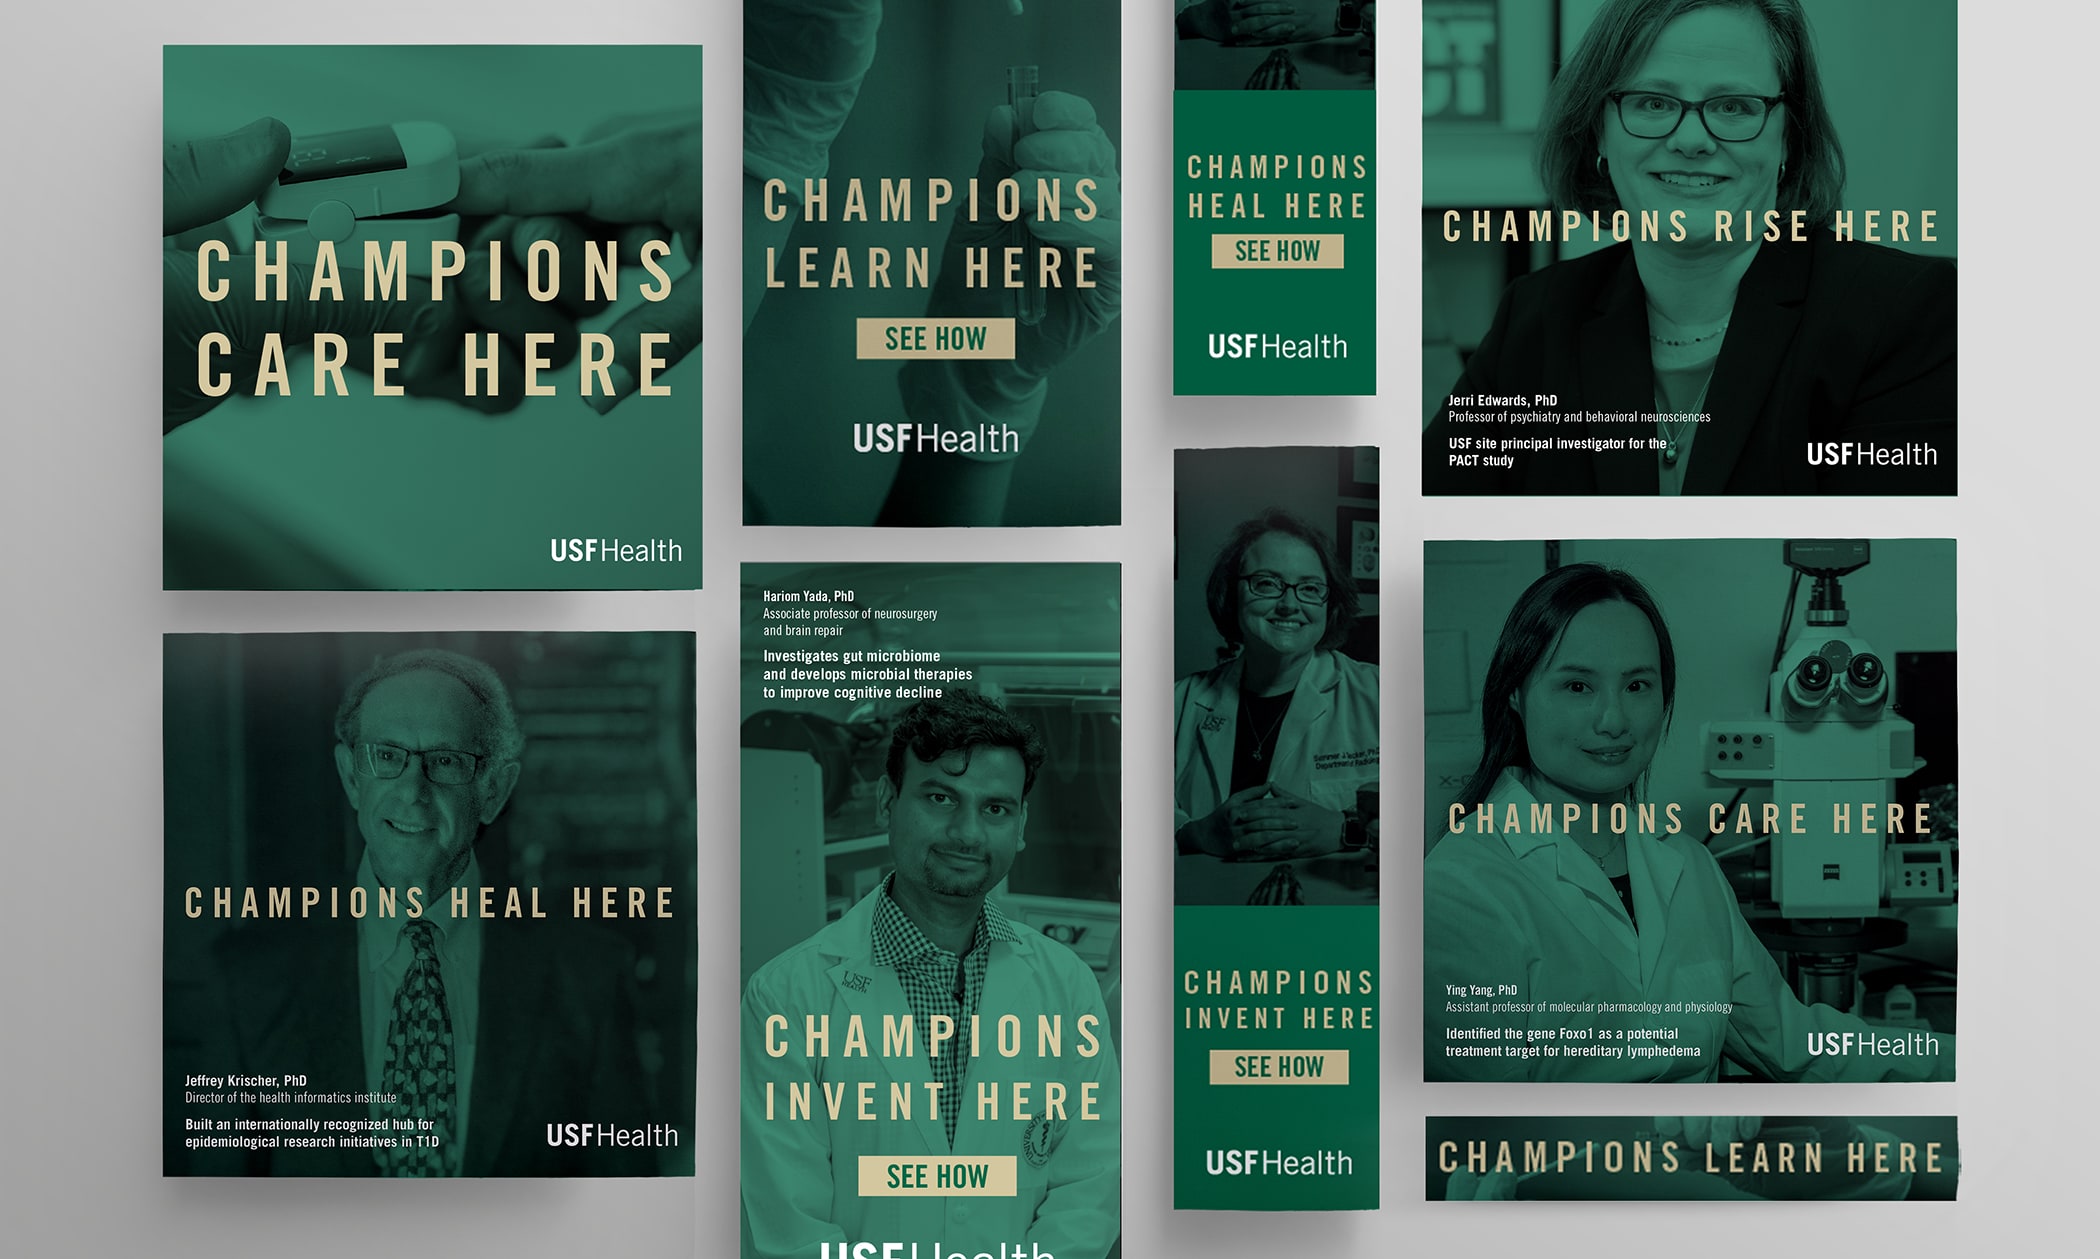 Collage of digital display ads for USF Health